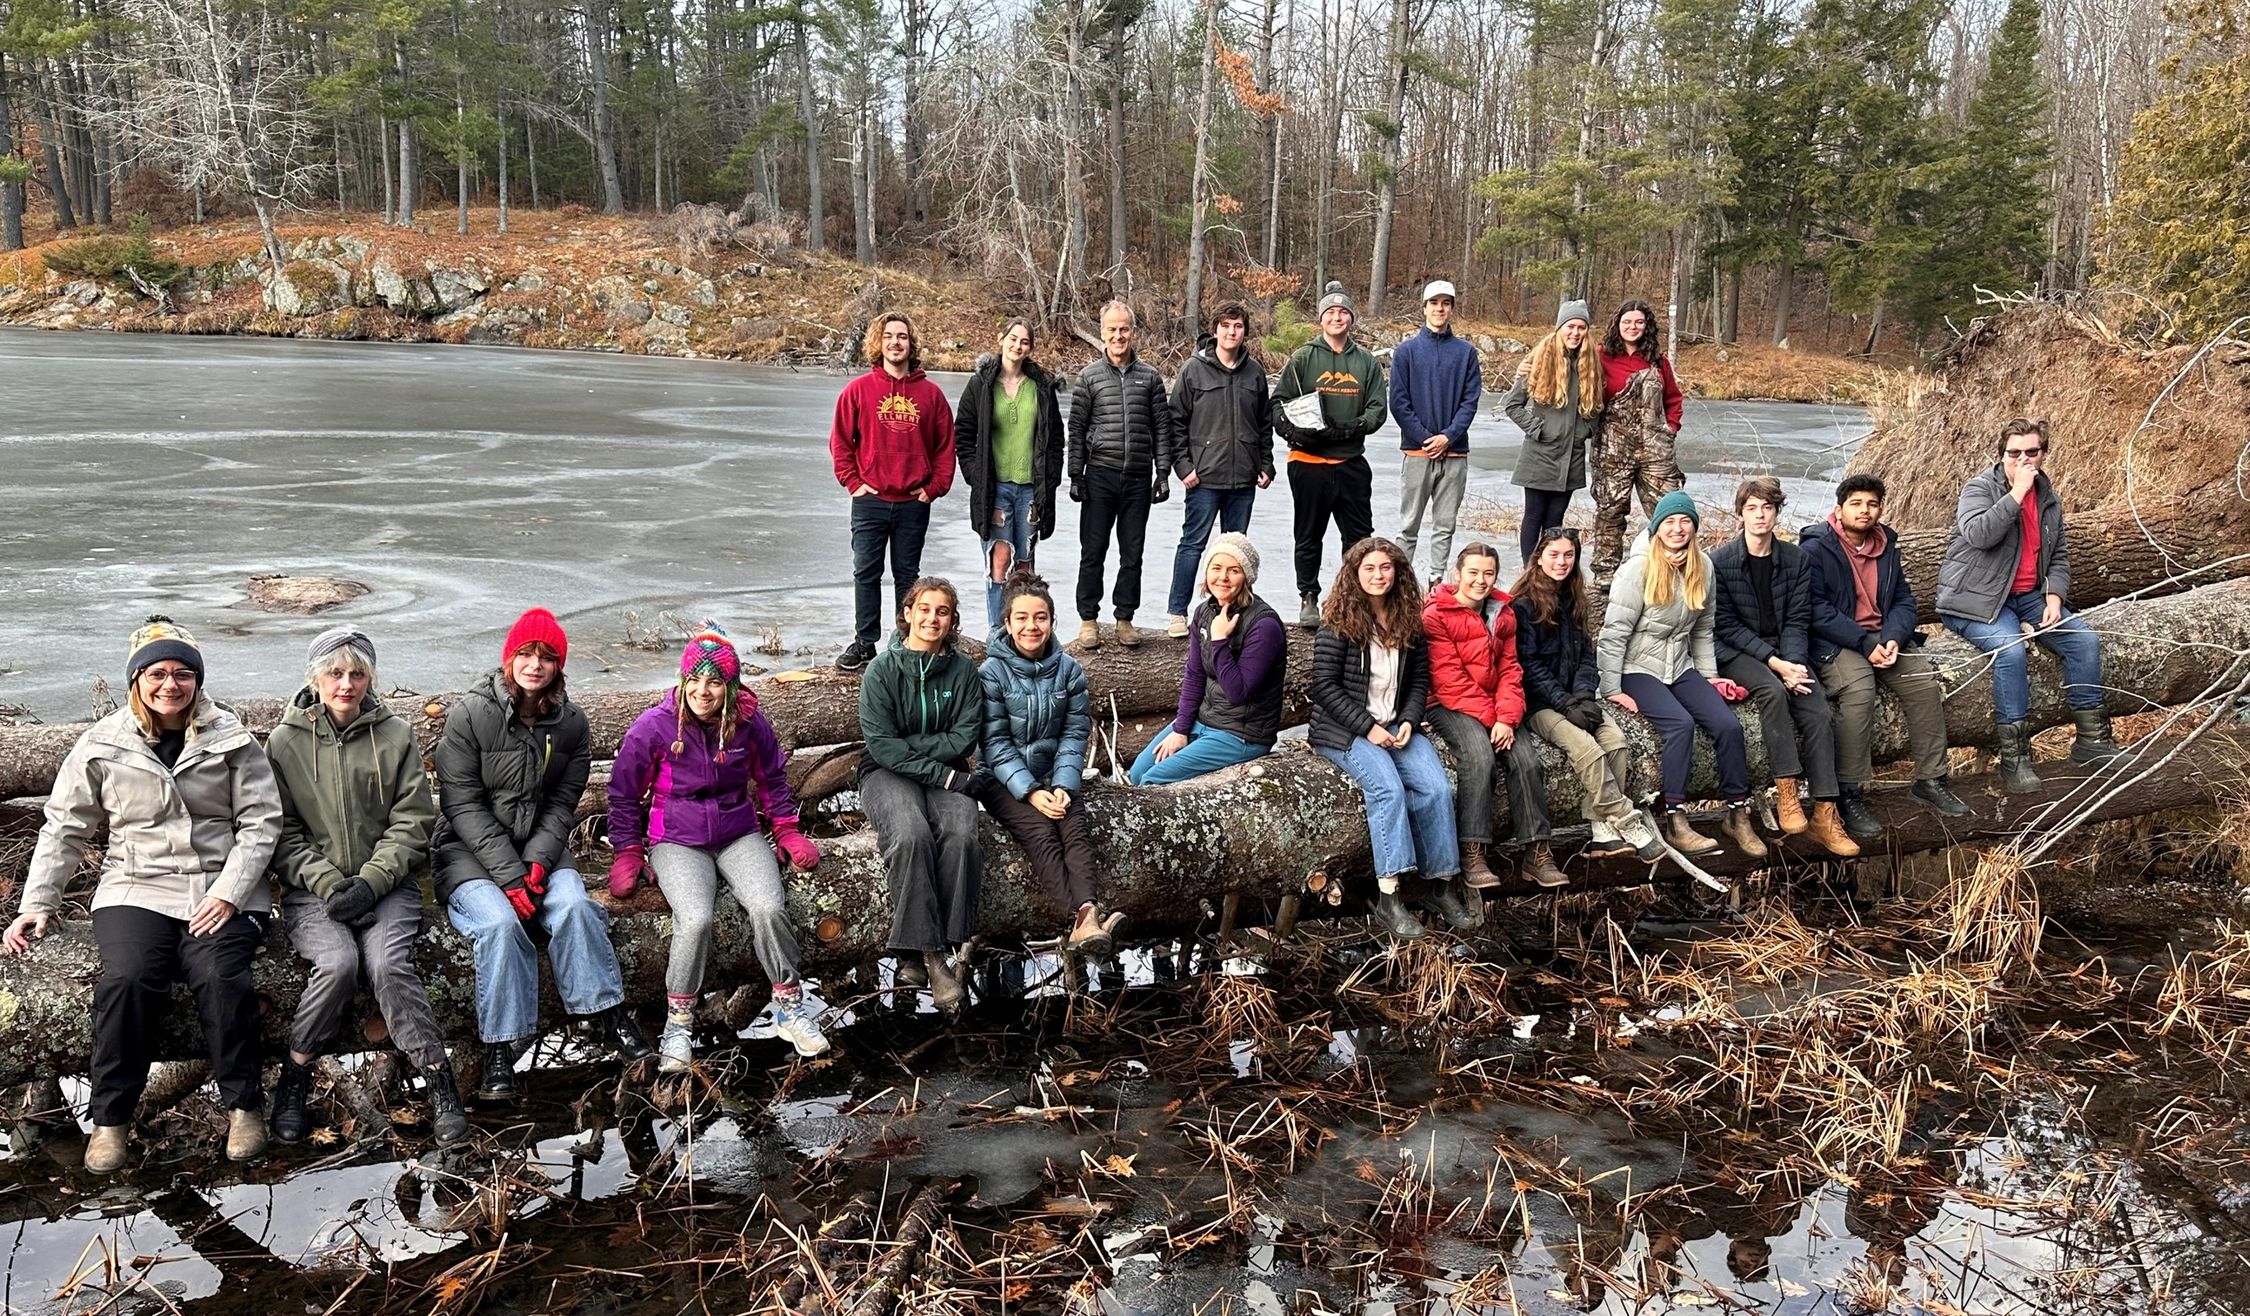 A group of twenty-two individuals of various attire are seated and standing on a fallen tree trunk over a body of frozen water, likely a lake or pond. The setting appears to be a cold day, as many individuals are wearing jackets, hats, and gloves. Bare trees and evergreens are visible in the background, suggesting a winter or late autumn season. The lighting suggests either early morning or late afternoon. There is no visible snow, but the ice on the water indicates freezing temperatures.